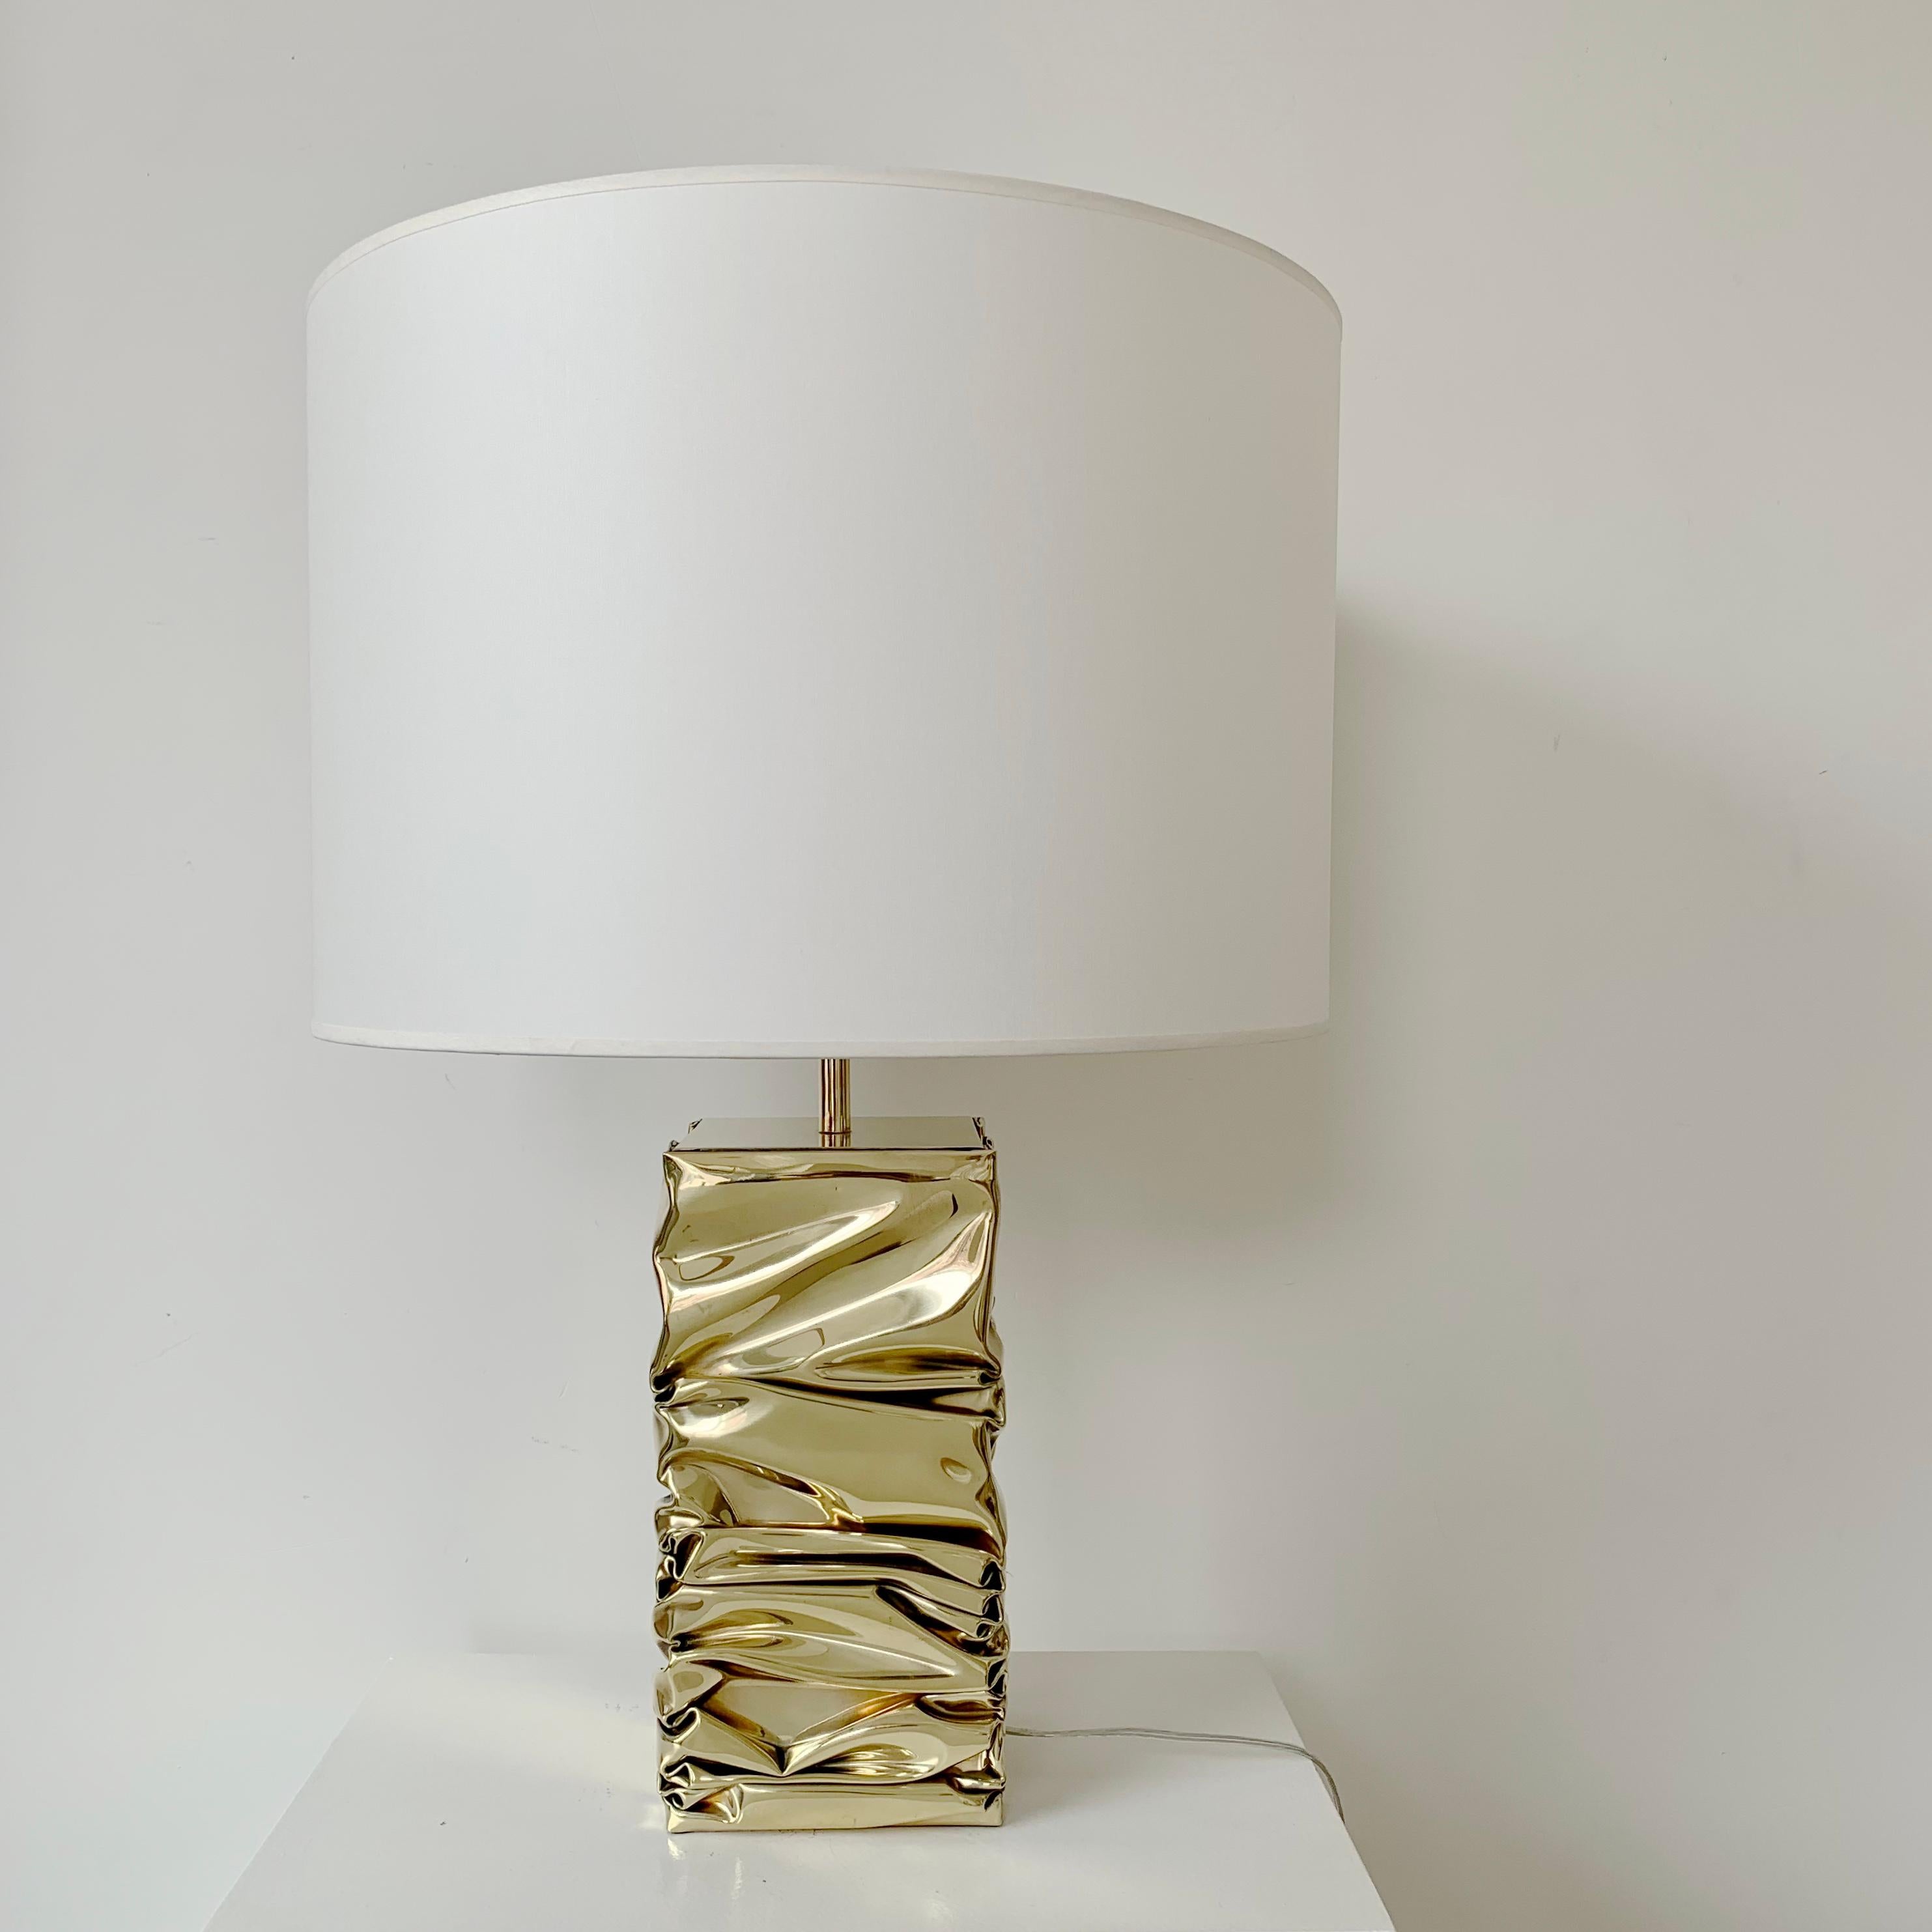 Jacques Moniquet Signed Brass Table Lamp, circa 1975, France. For Sale 1